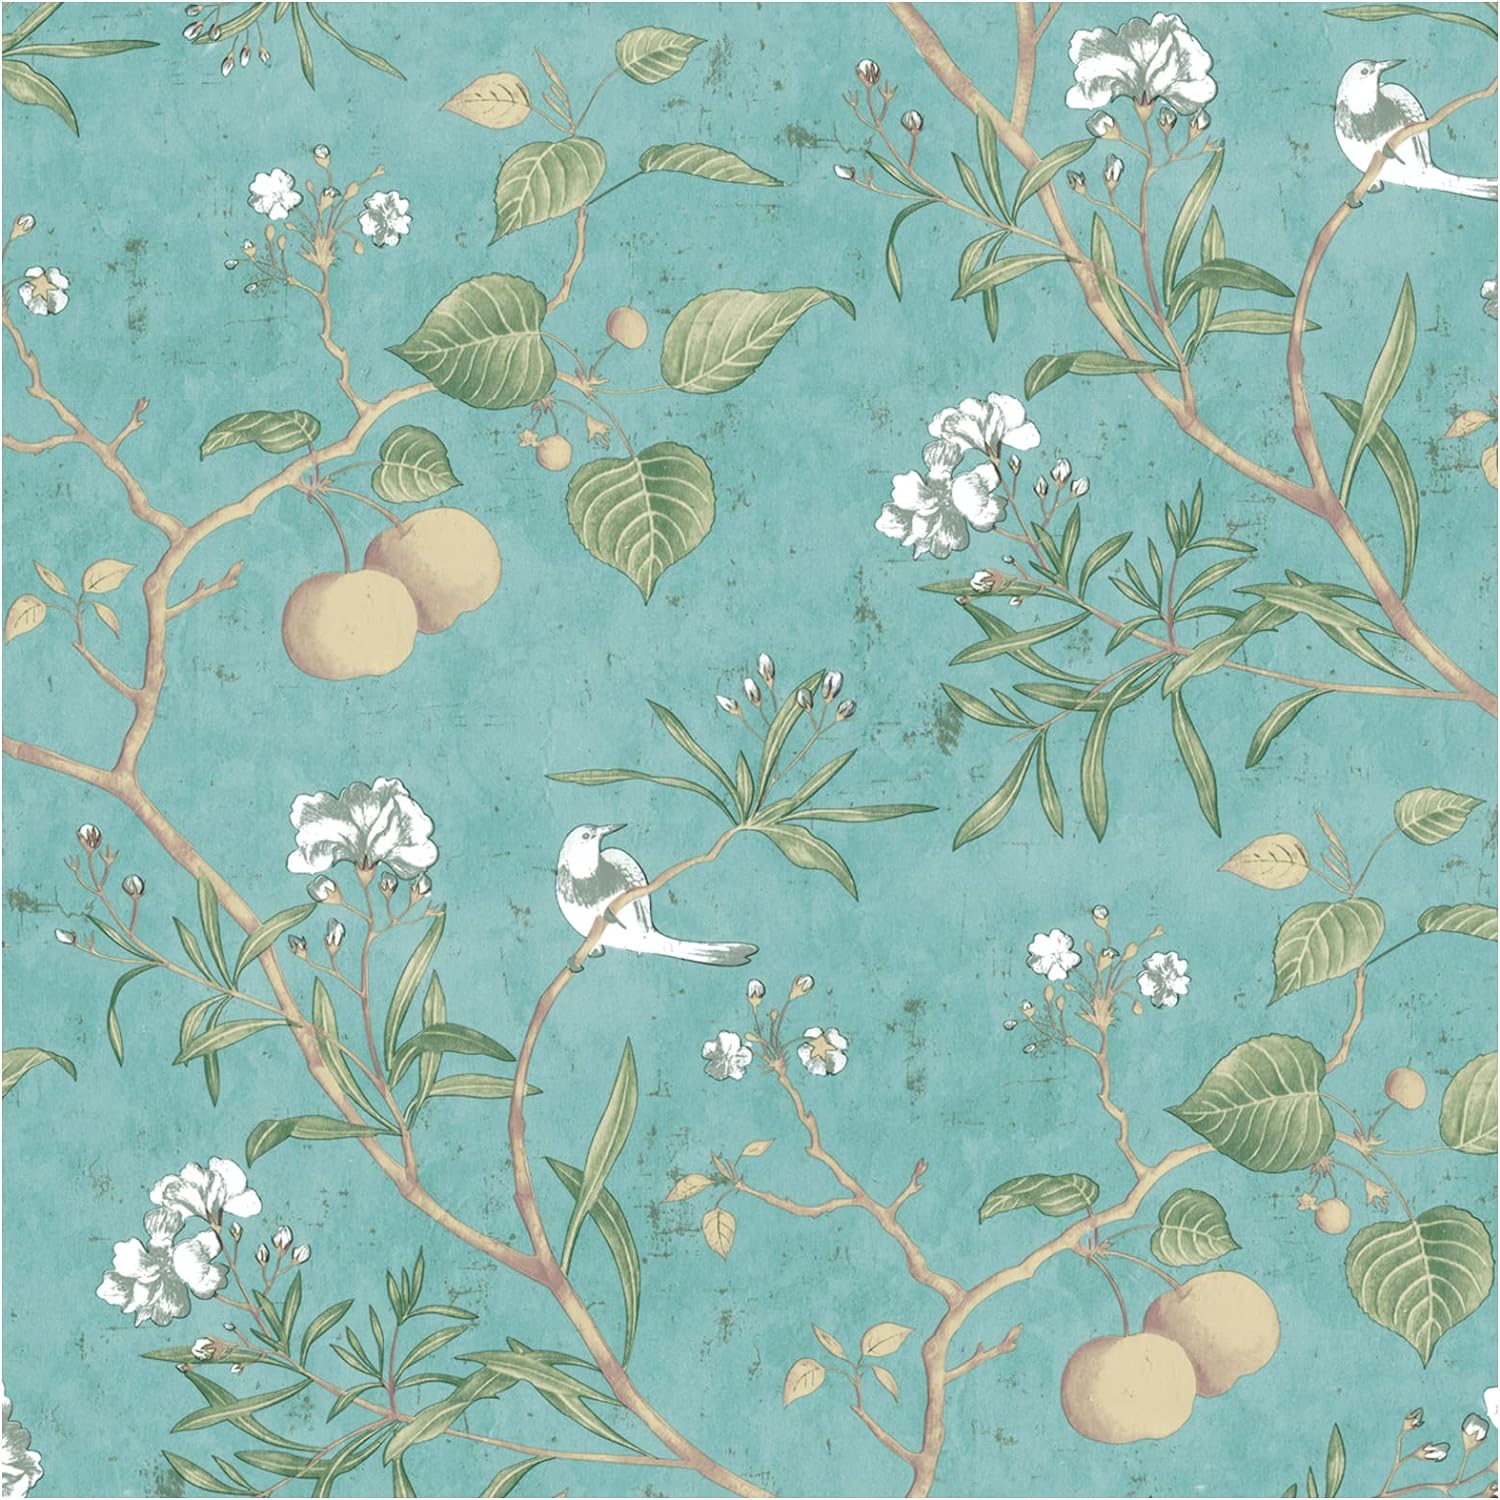 Floral Peel and Stick Wallpaper Contact Paper: Vintage Removable, Bird Stick on Wallpaper 17.7 x 118.1 inch Self Adhesive Green